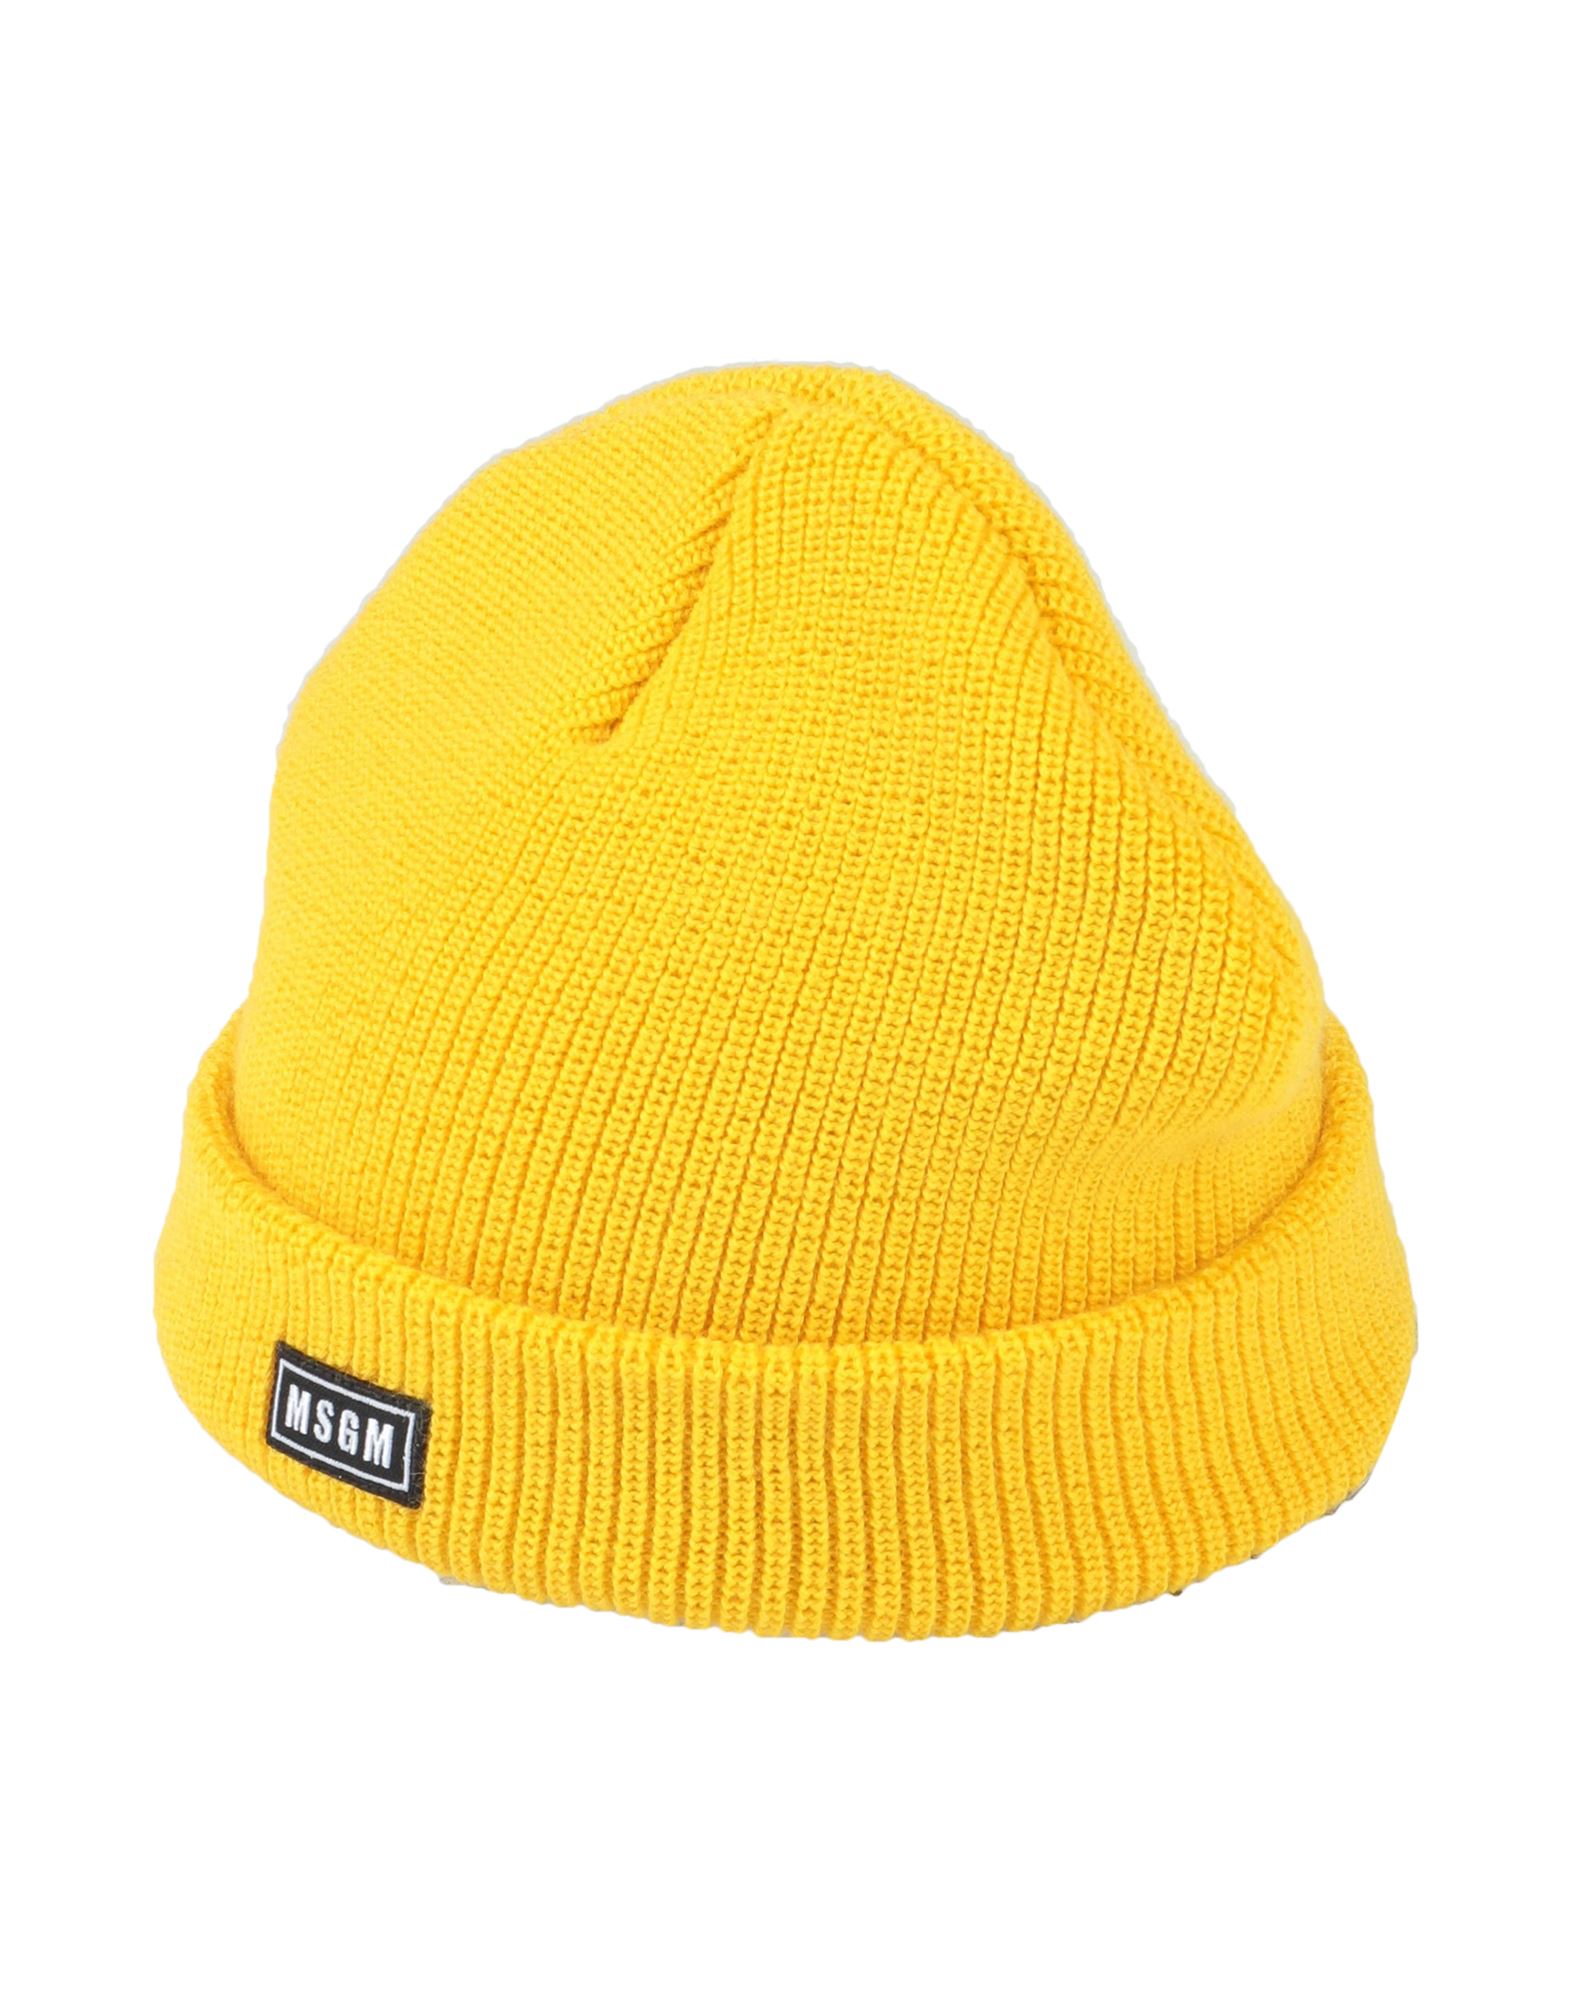 Msgm Hats In Yellow